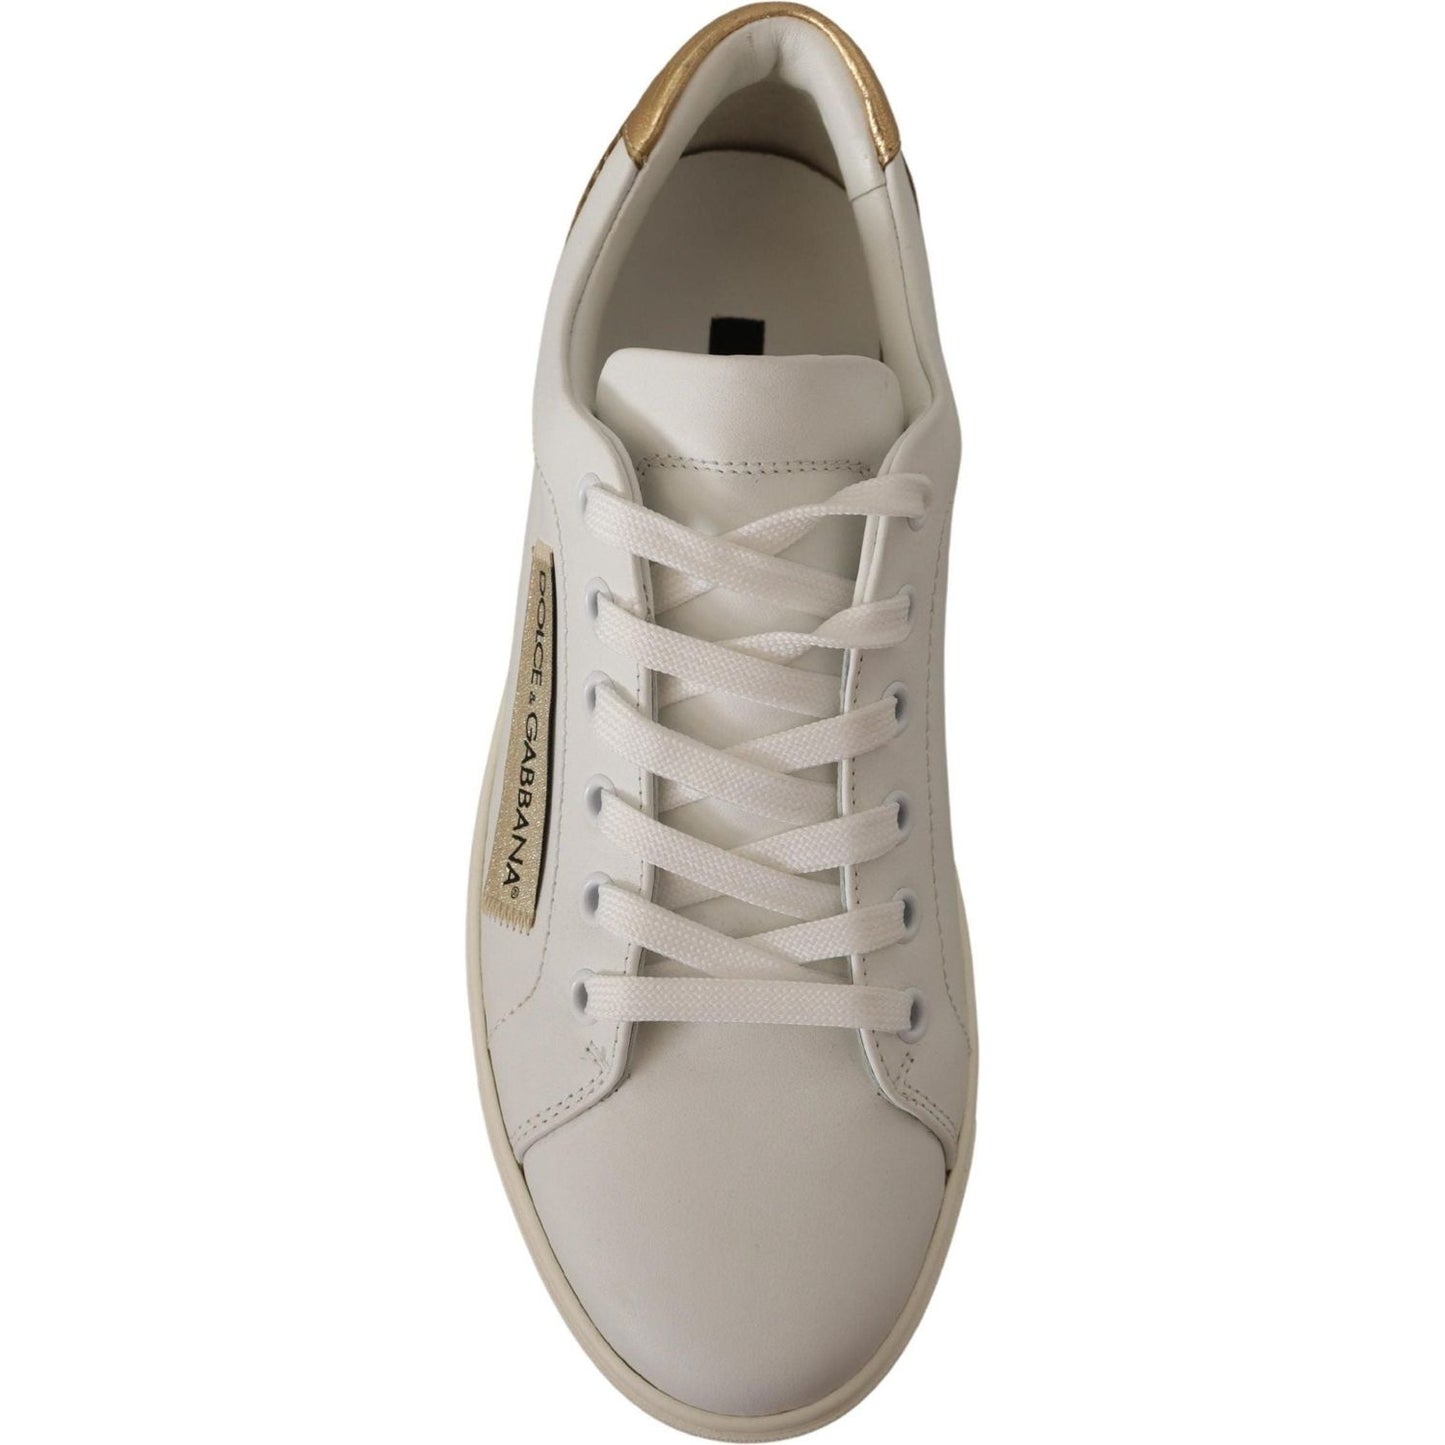 Dolce & Gabbana Elegant White Leather Sneakers with Gold Accents white-gold-leather-low-top-sneakers IMG_0497-scaled-0af3918a-41c.jpg